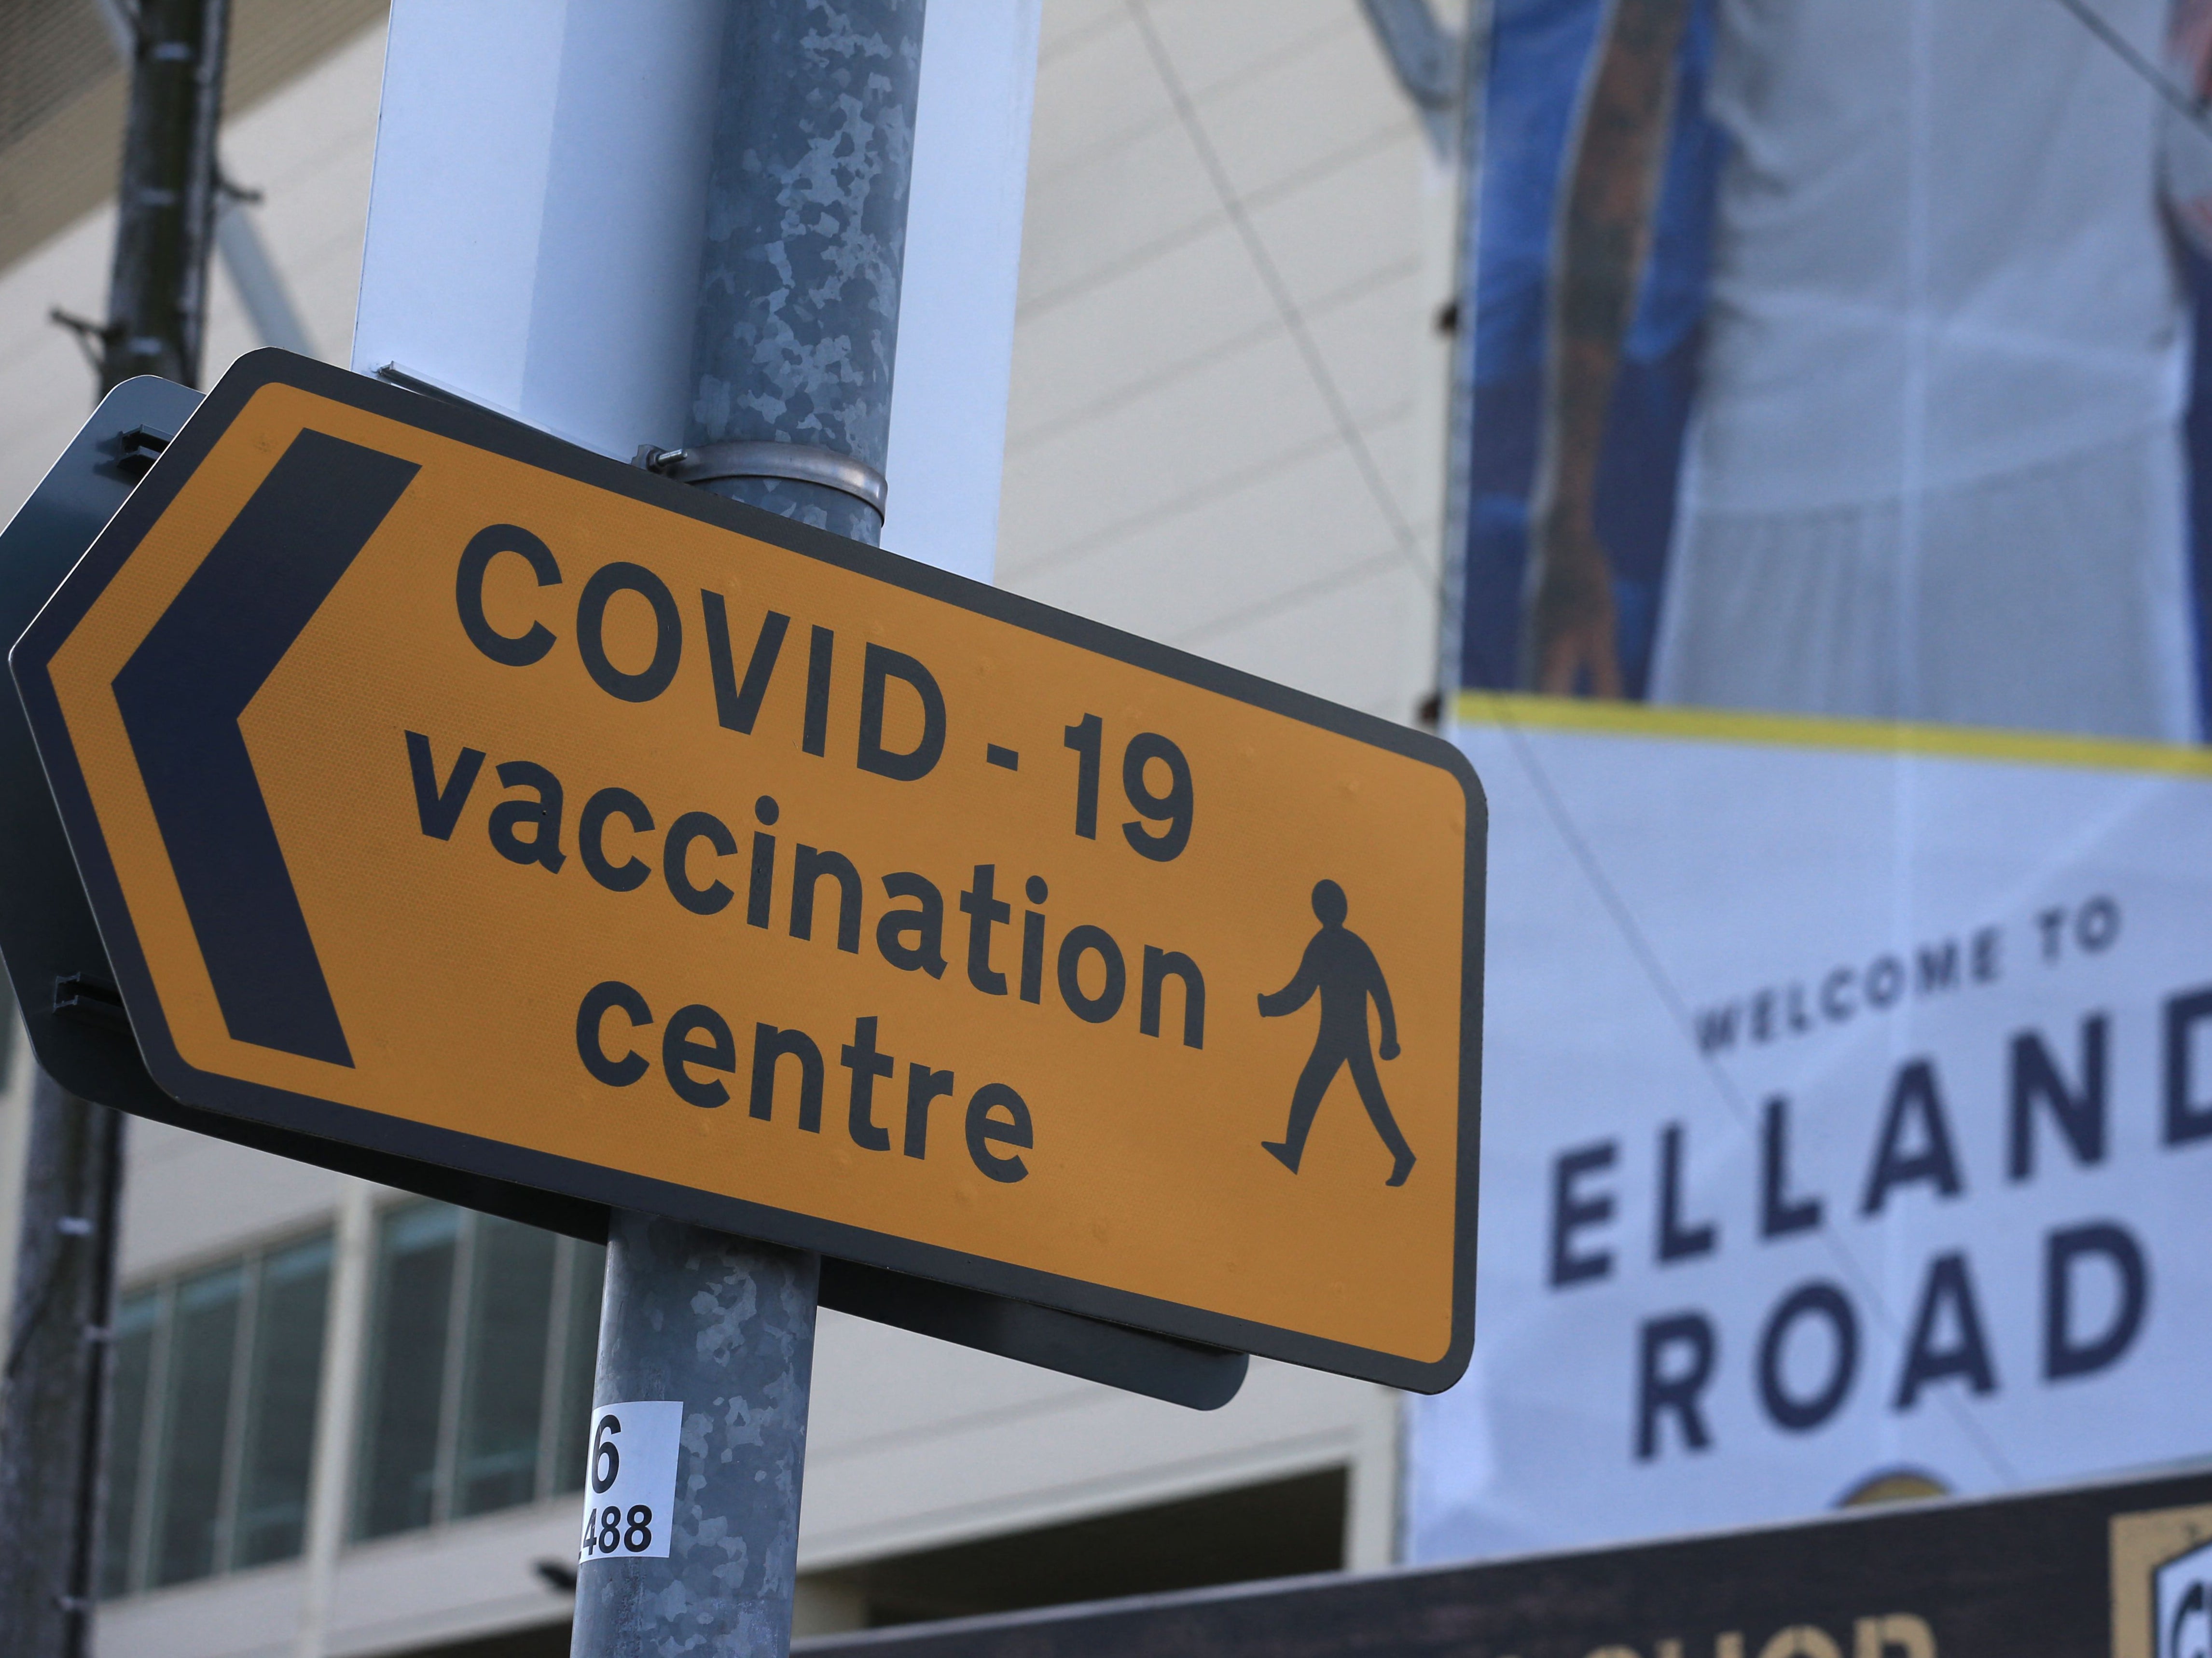 A street sign directs people to the Covid vaccination centre at Elland Road in Leeds